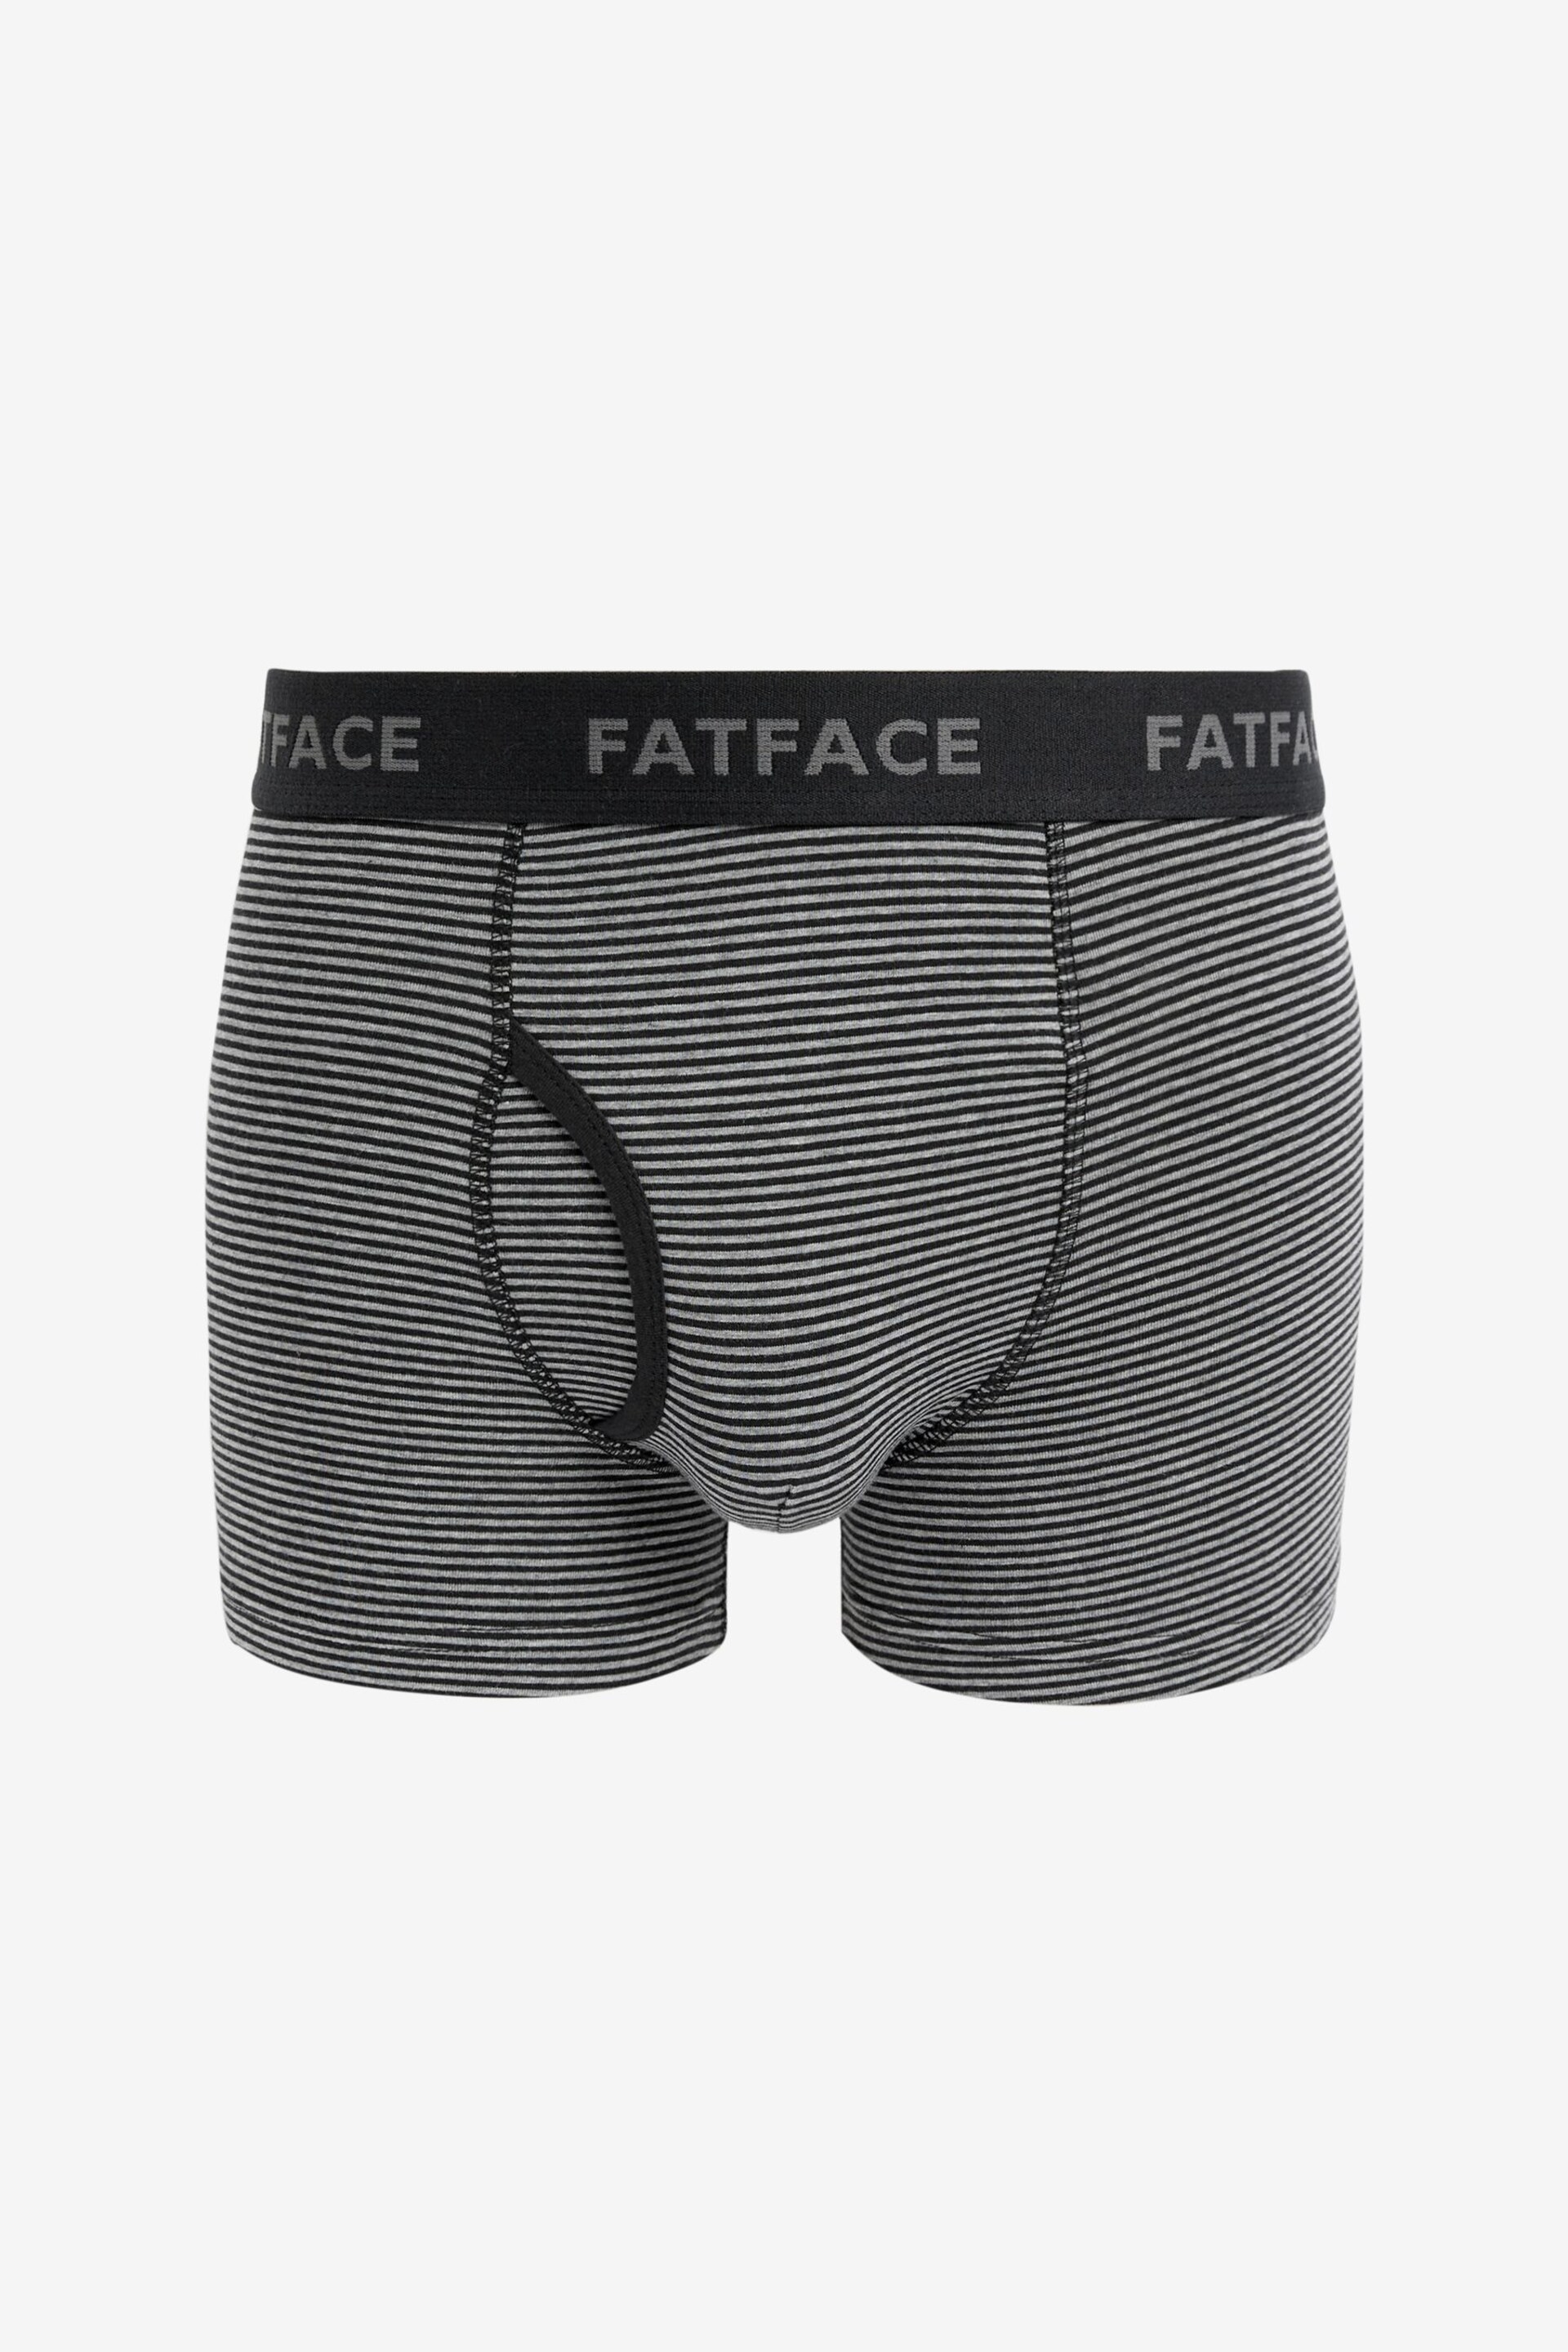 FatFace Grey Classic Stripe Boxers 3 Pack - Image 3 of 6